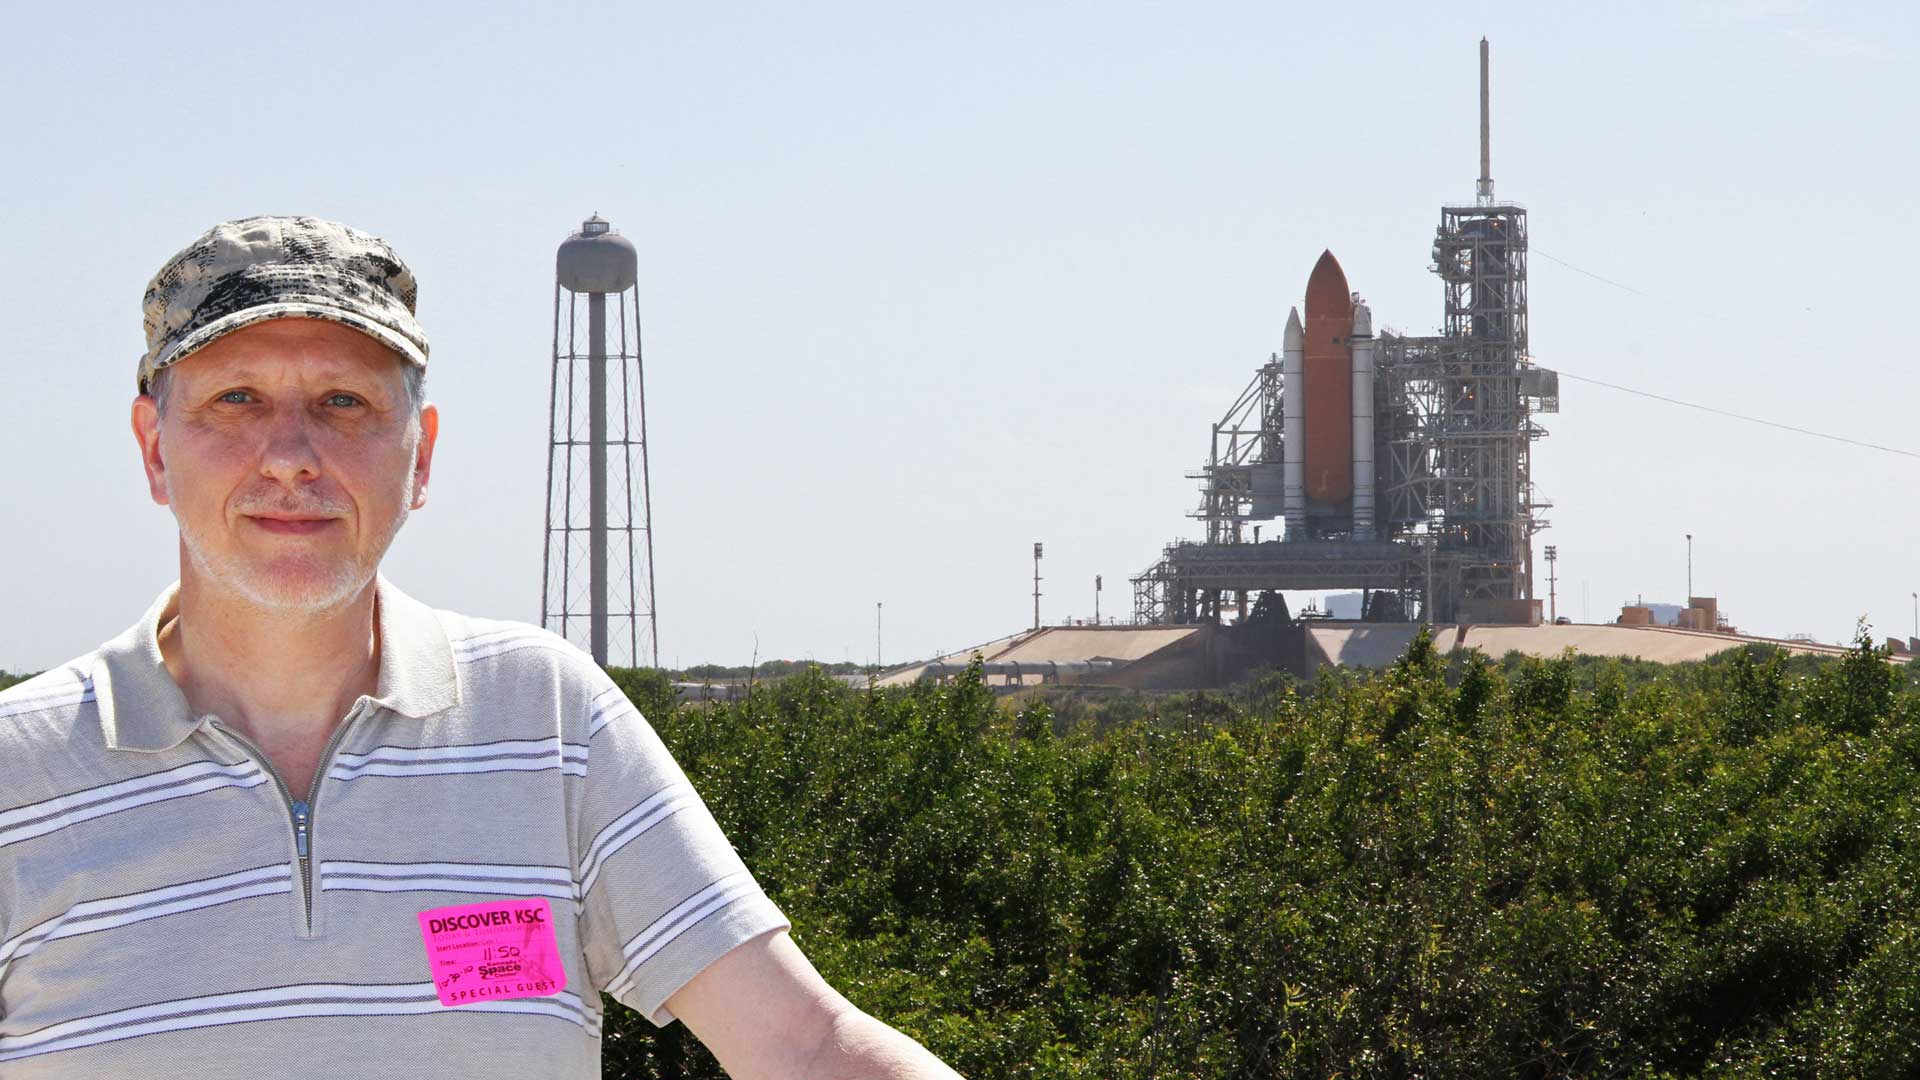 Gregor Spörri researches Space Shuttle Start in Cape Canaveral.